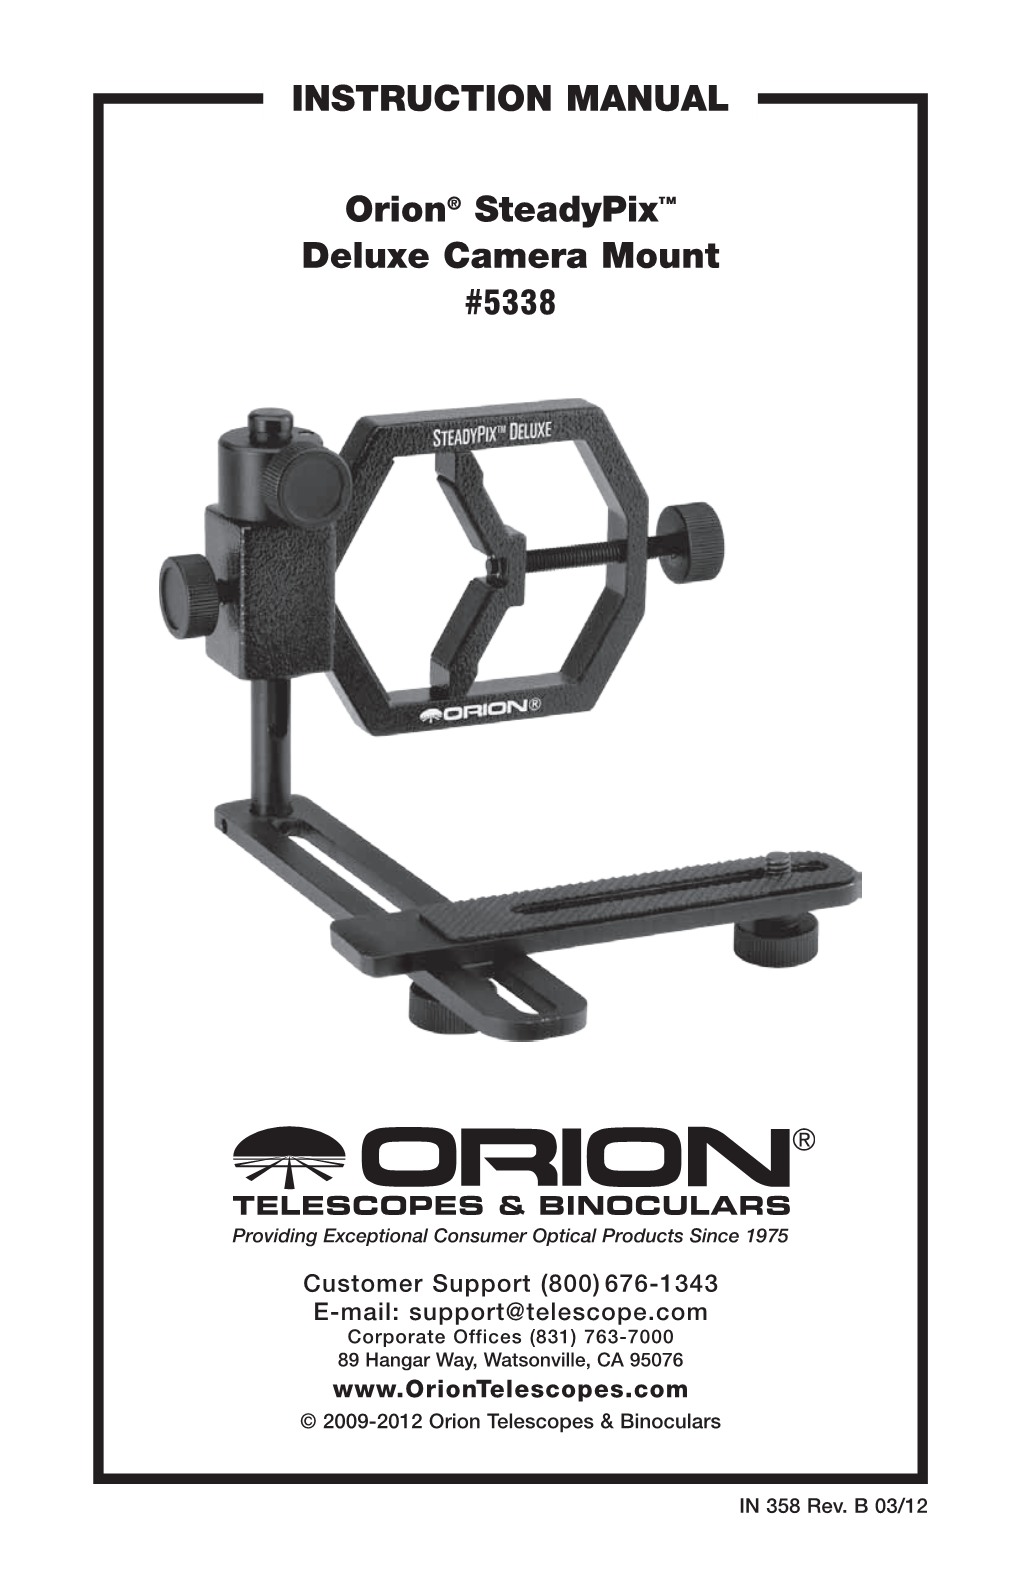 Orion® Steadypix™ Deluxe Camera Mount Instruction Manual